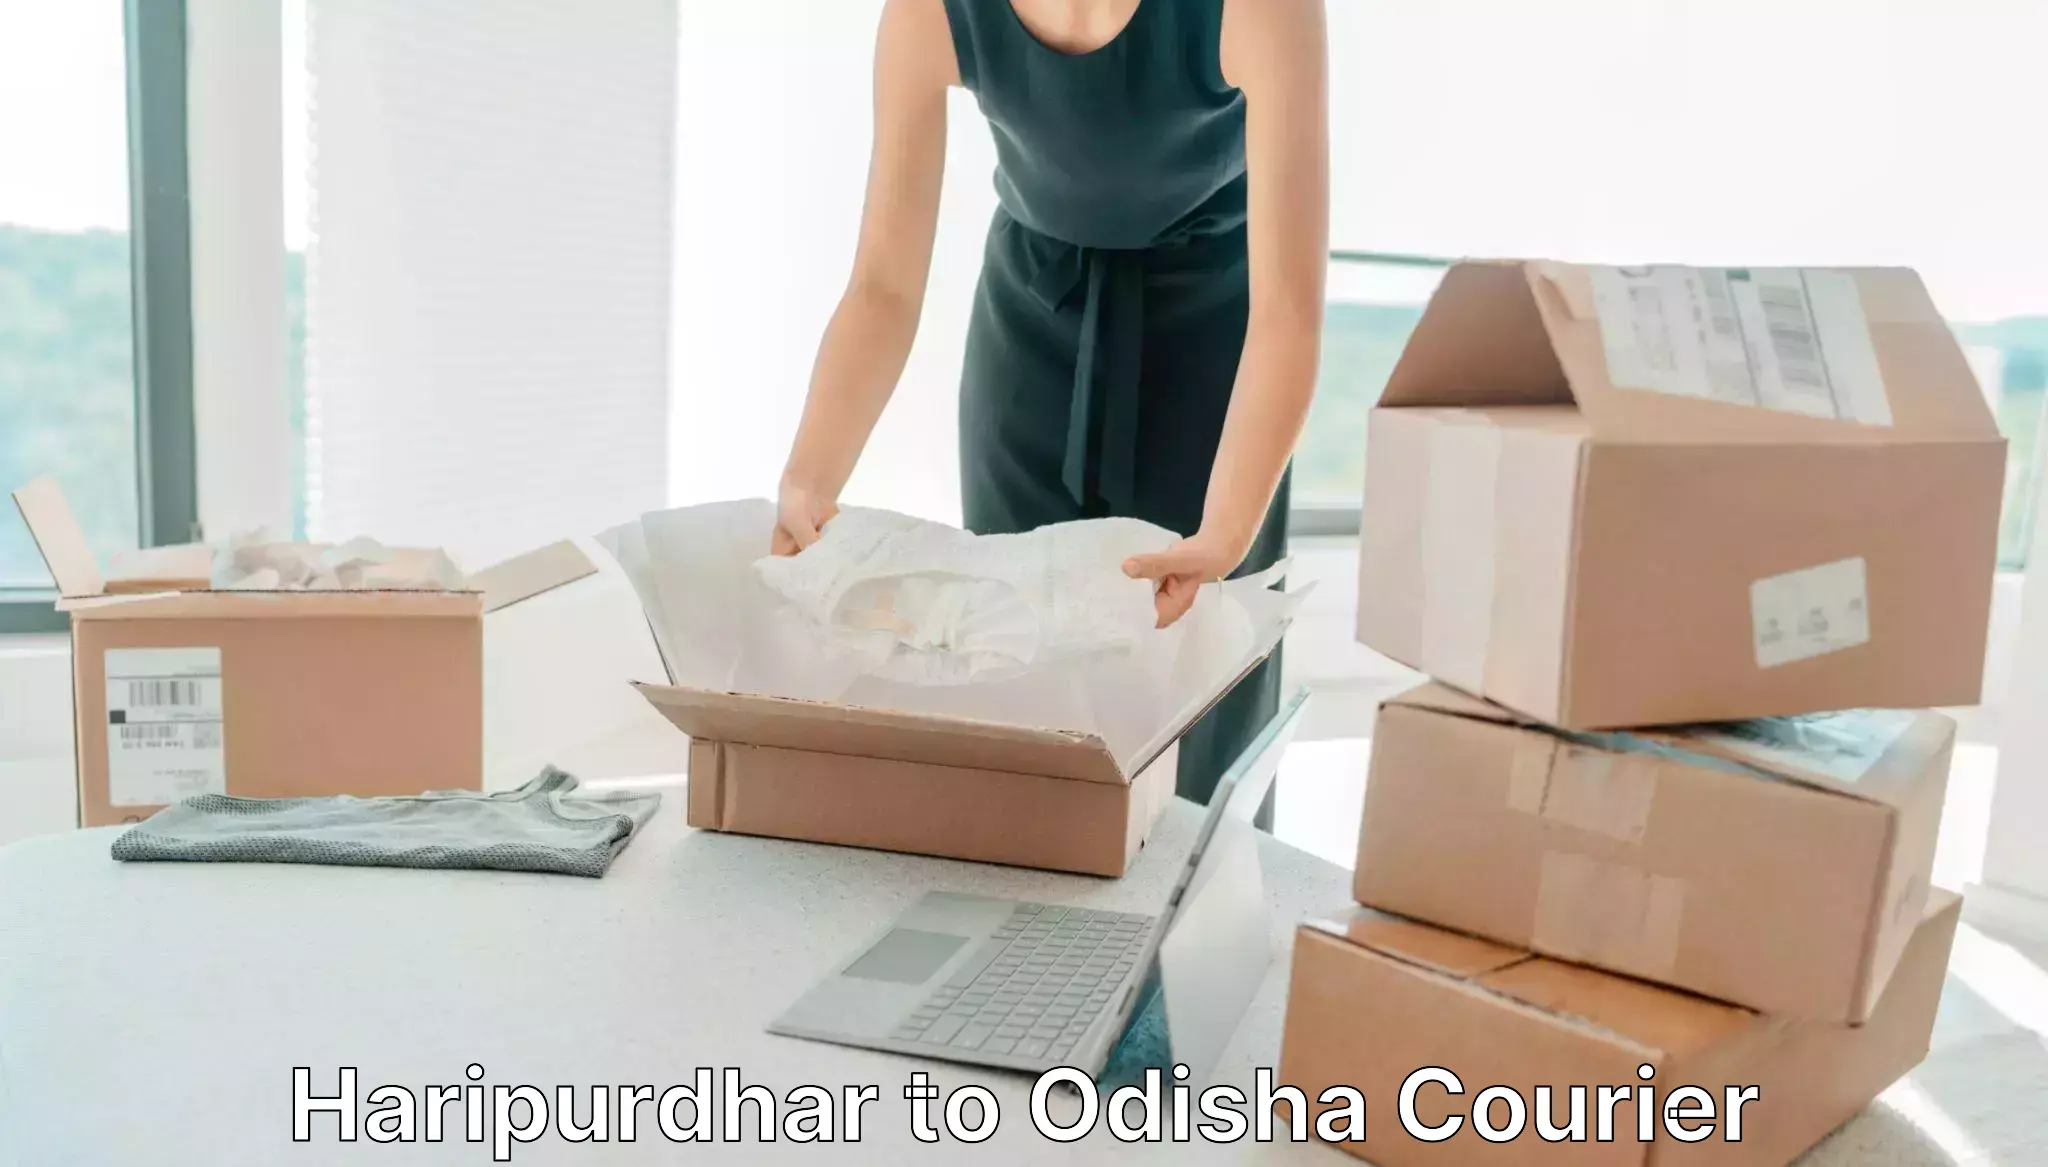 Courier service innovation Haripurdhar to Kendrapara